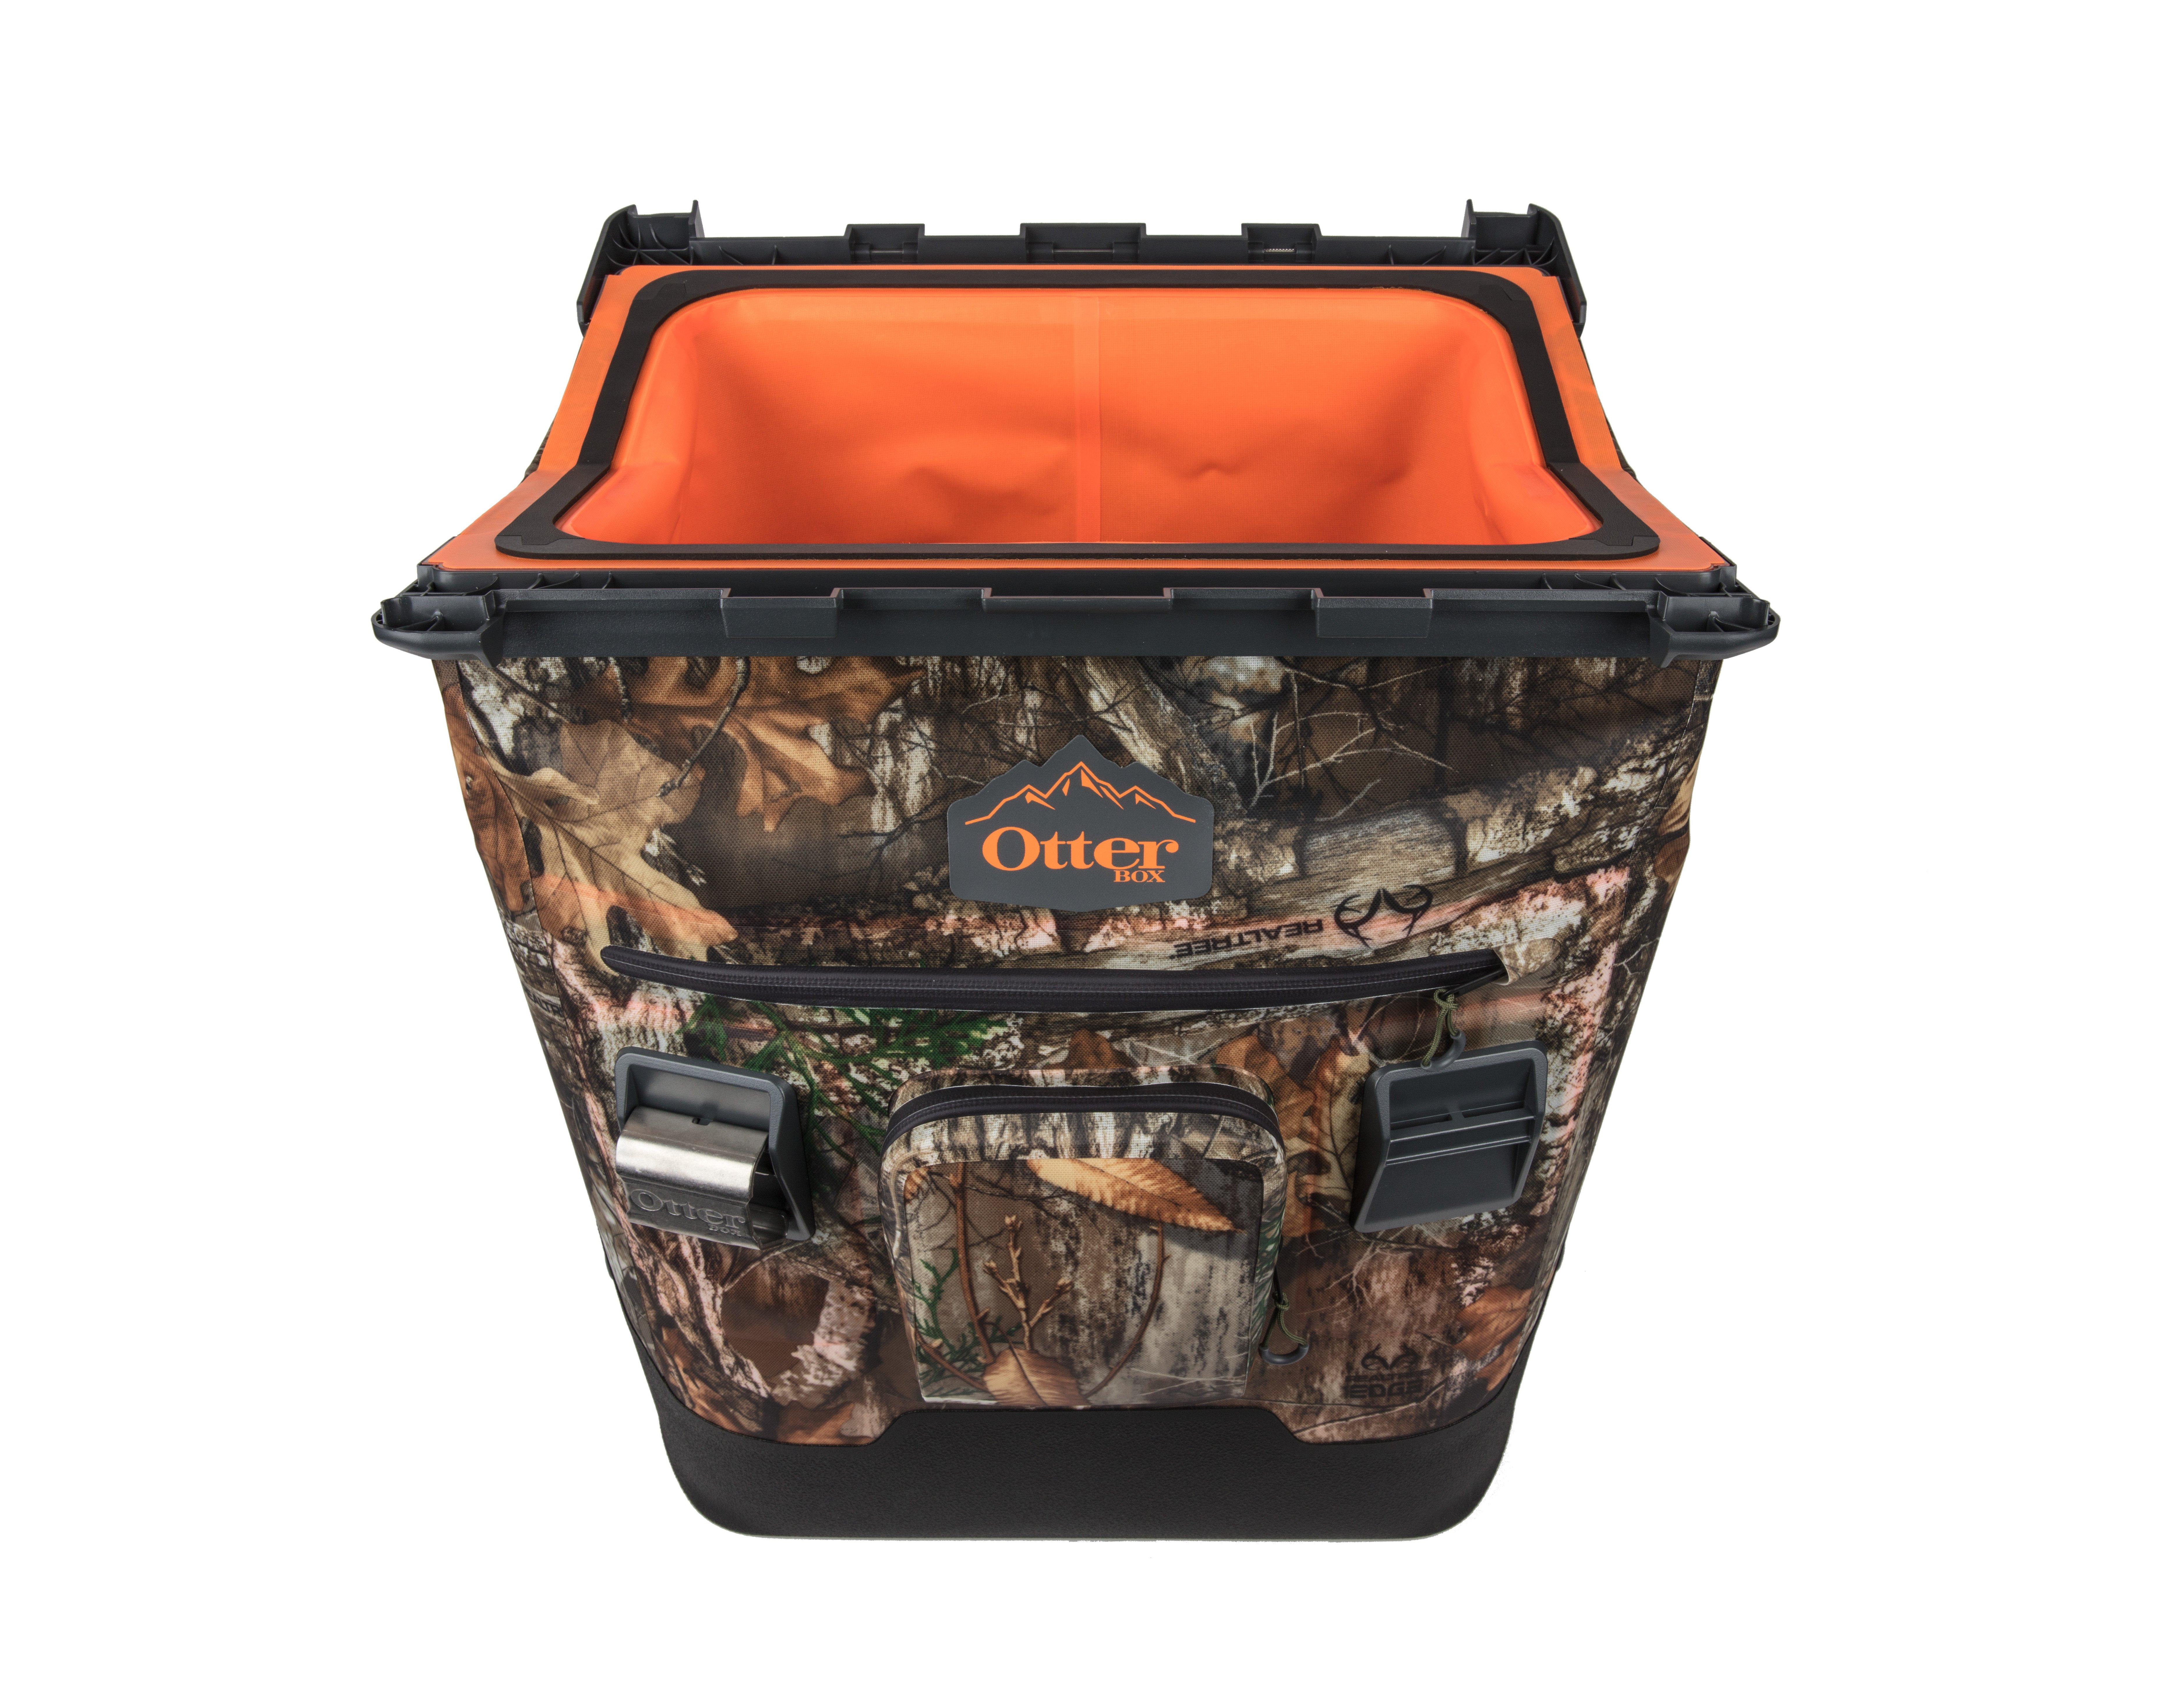 OtterBox Trooper LT 30 Soft-Sided Cooler in Realtree EDGE